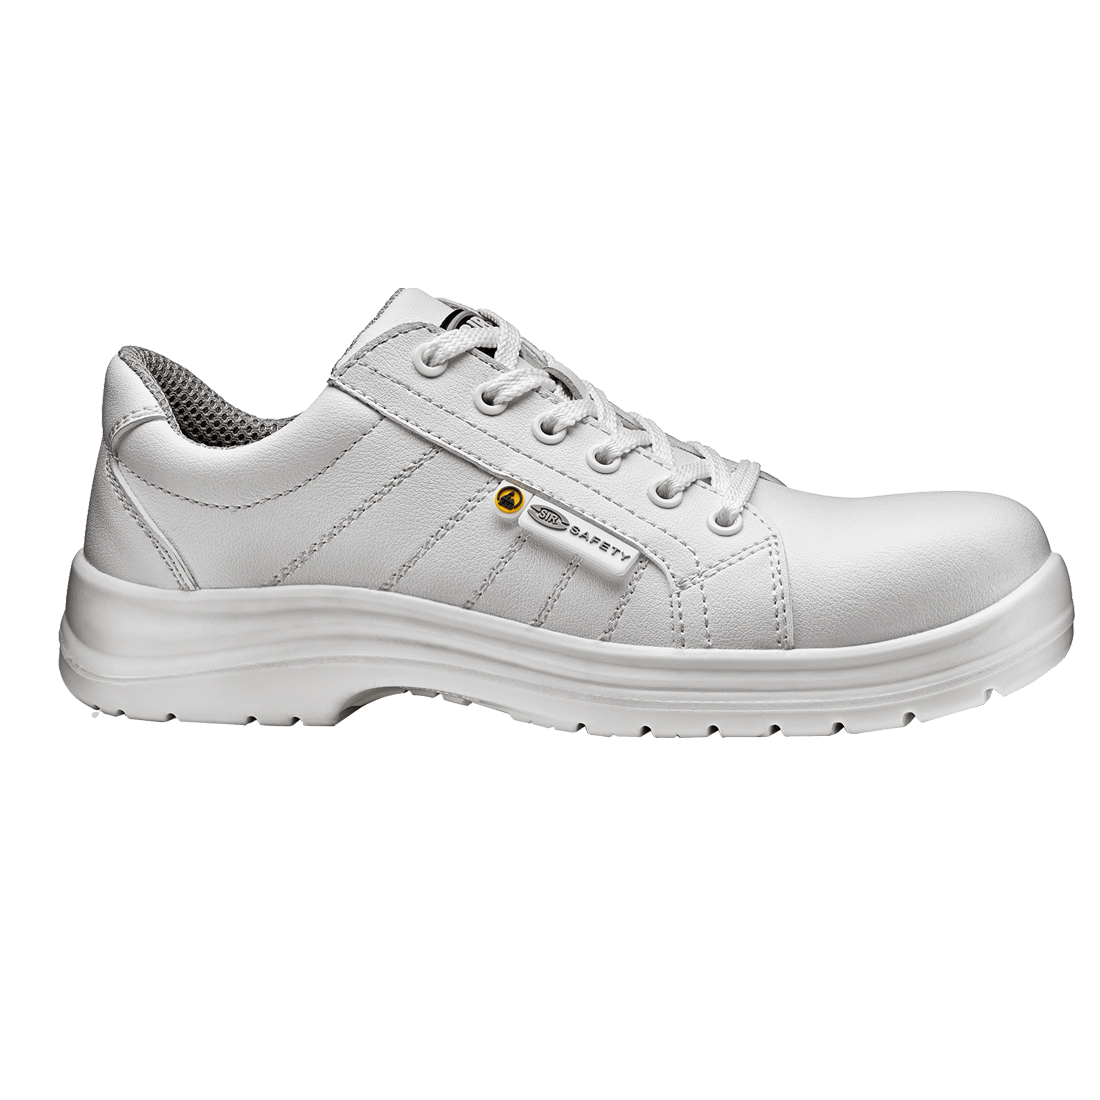 WHITE FOBIA LOW SHOE | Sir Safety System